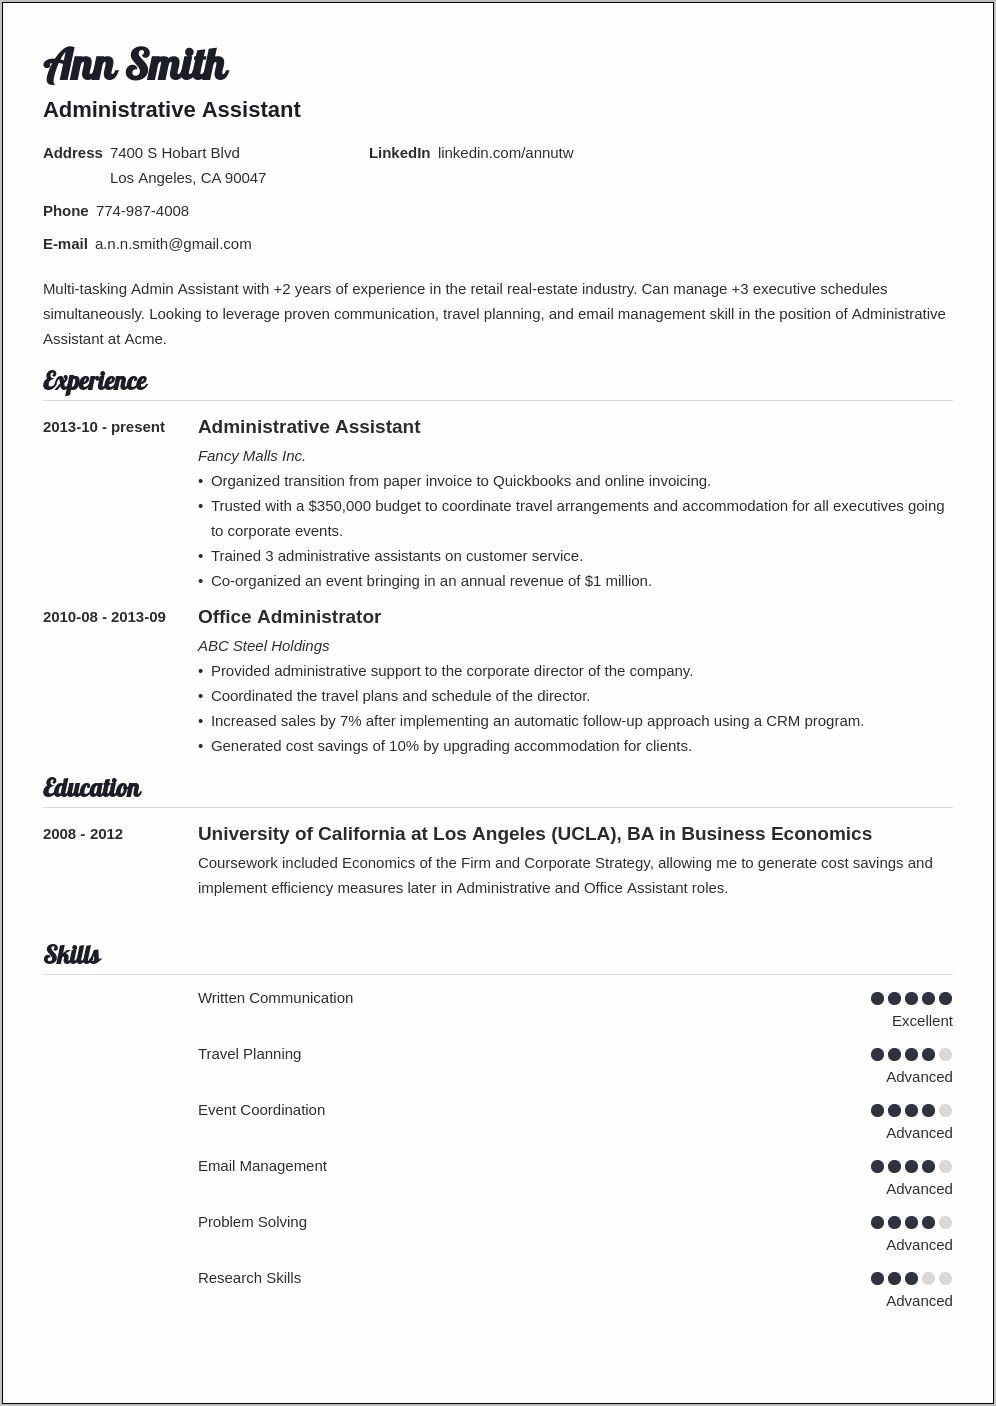 Resume Professional Summary For Service Advisor Assistants